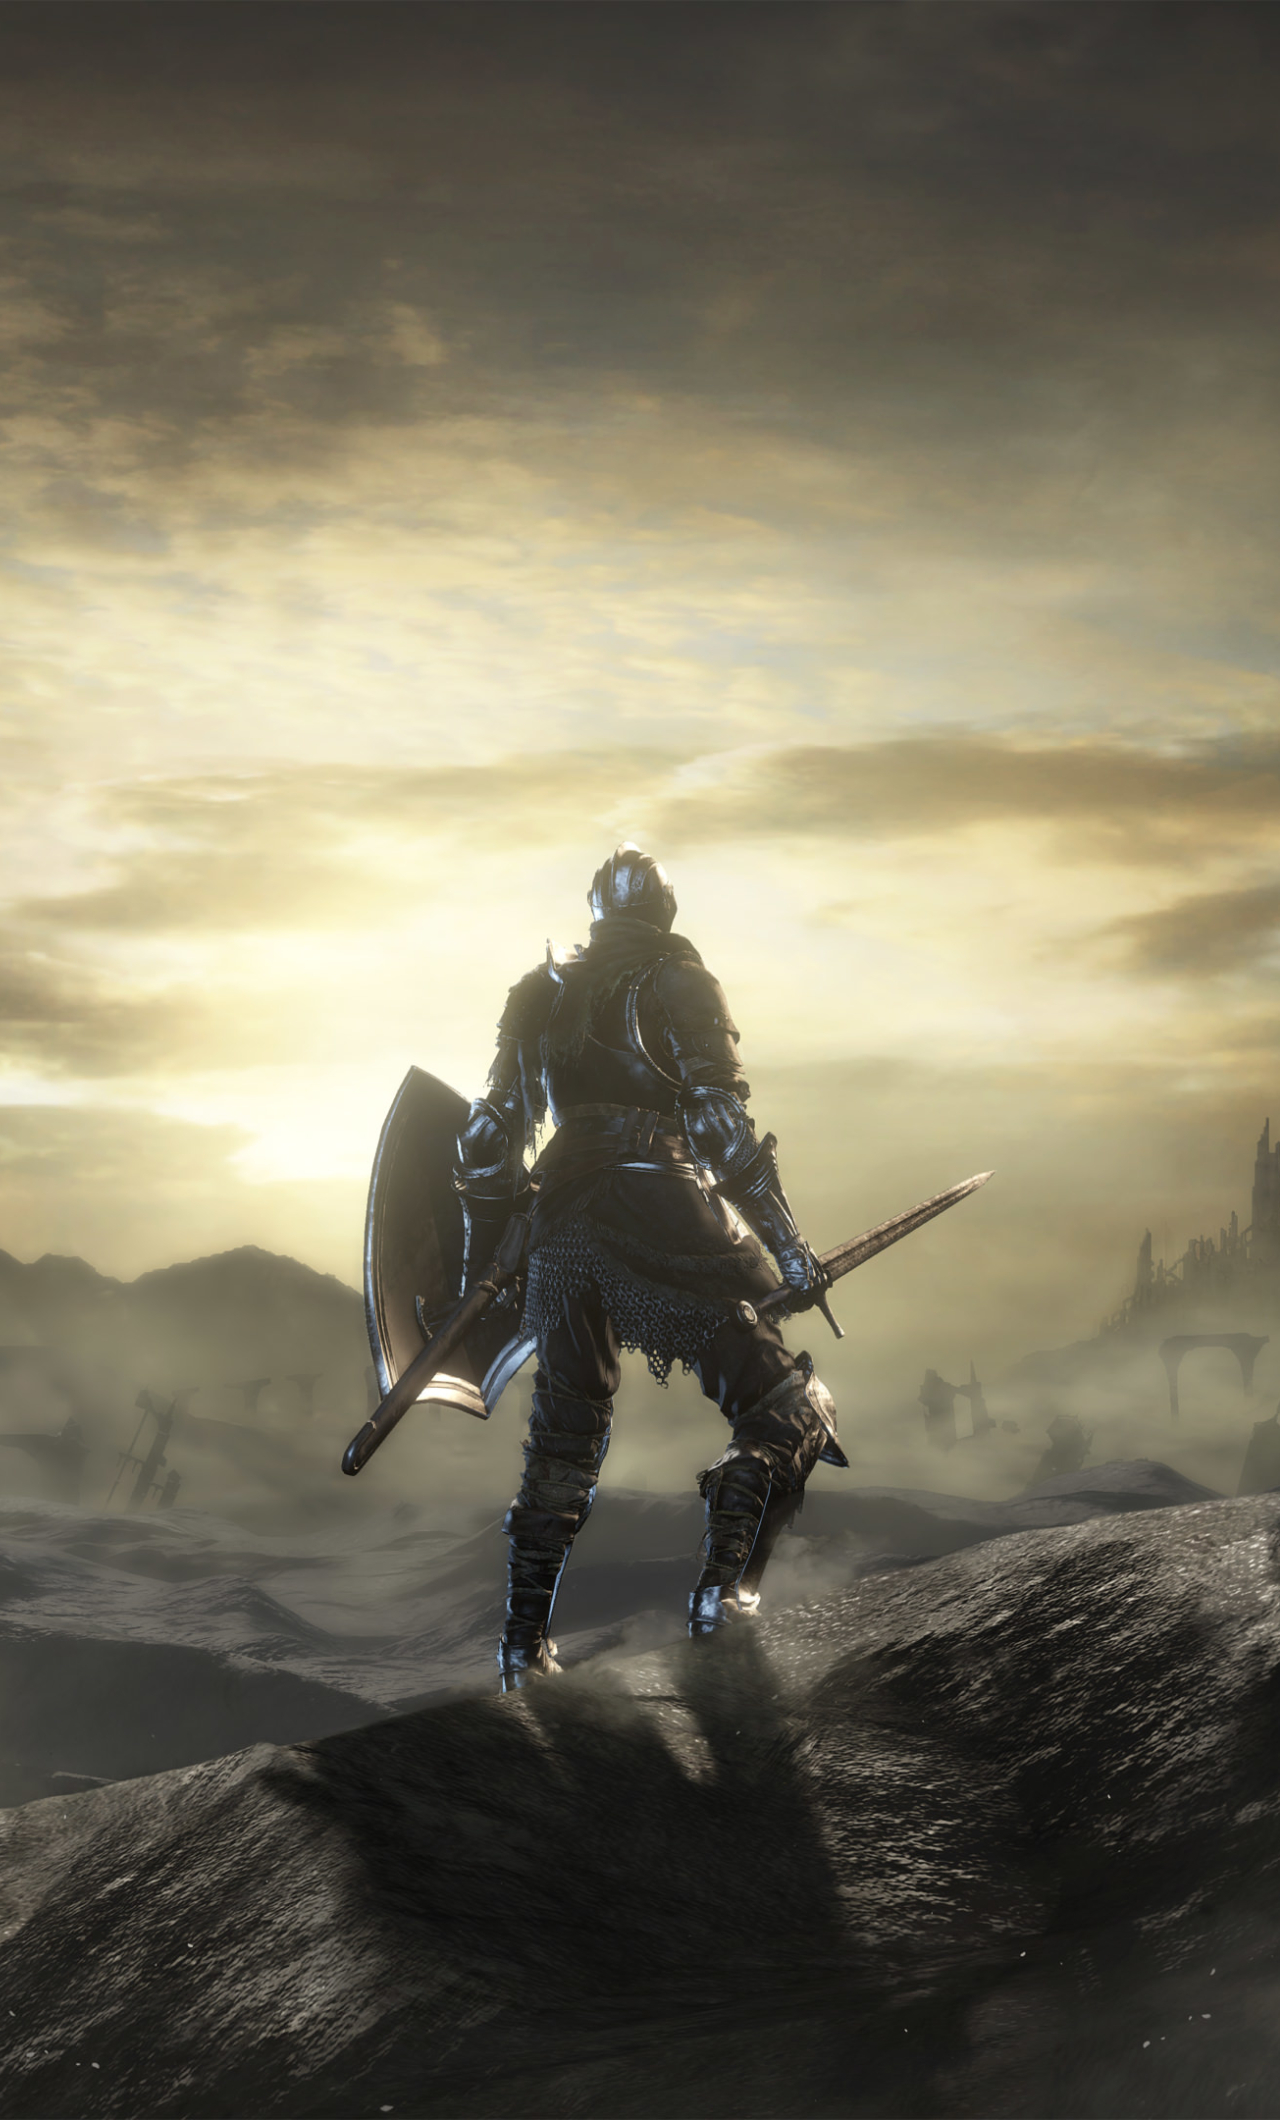 1280x21 Dark Souls 3 Warrior Iphone 6 Plus Wallpaper Hd Games 4k Wallpapers Images Photos And Background